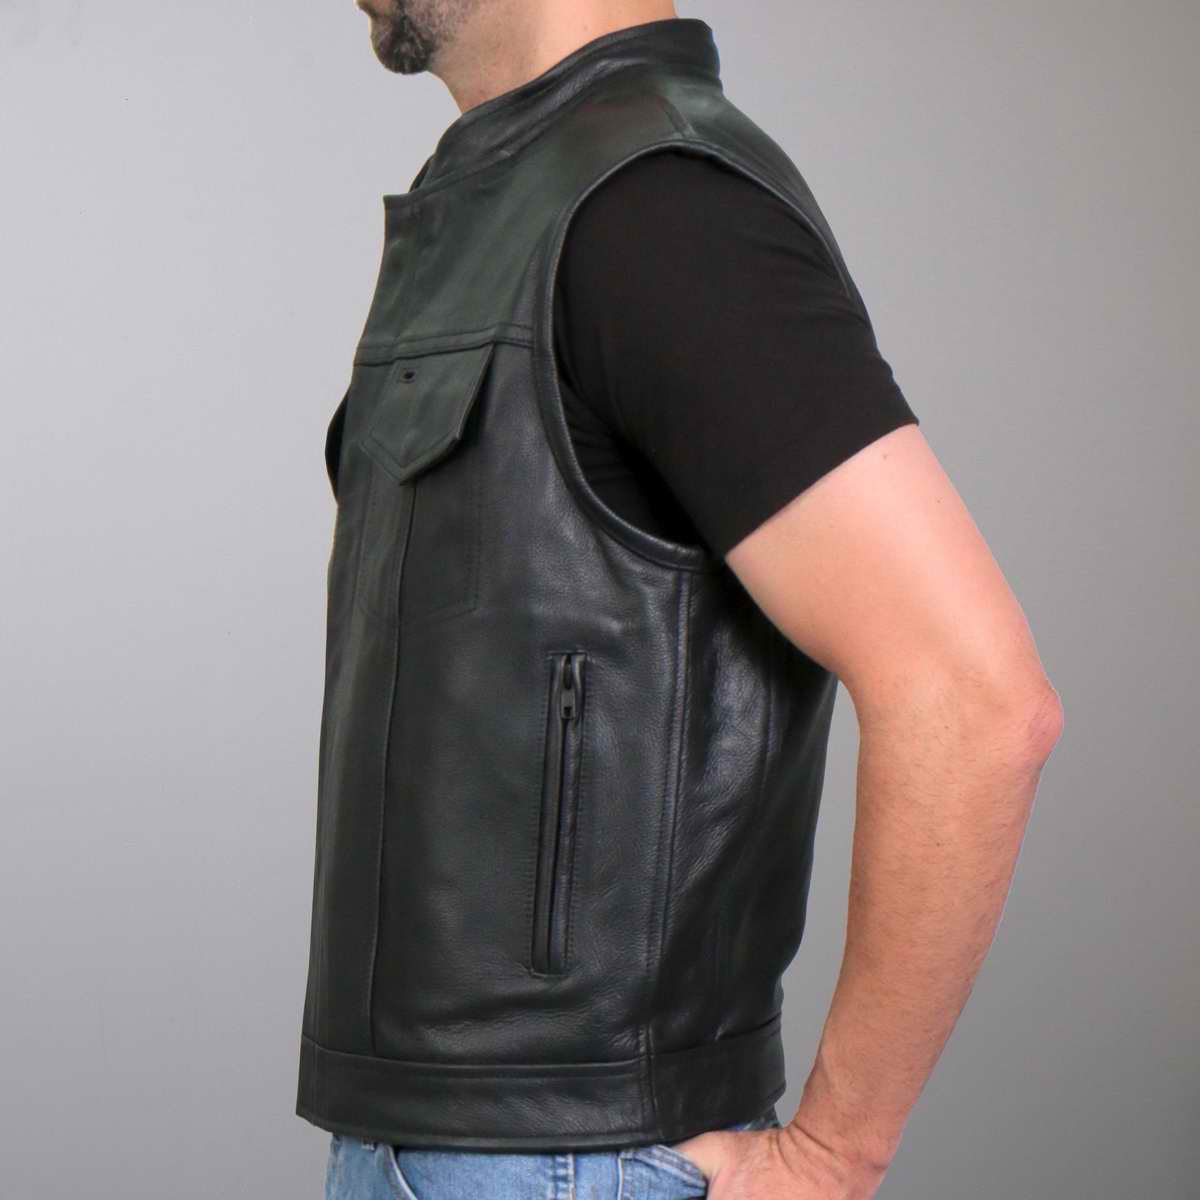 Hot Leathers VSM1053 Men's Black 'Don't Tread On Me' Conceal and Carry Leather Vest